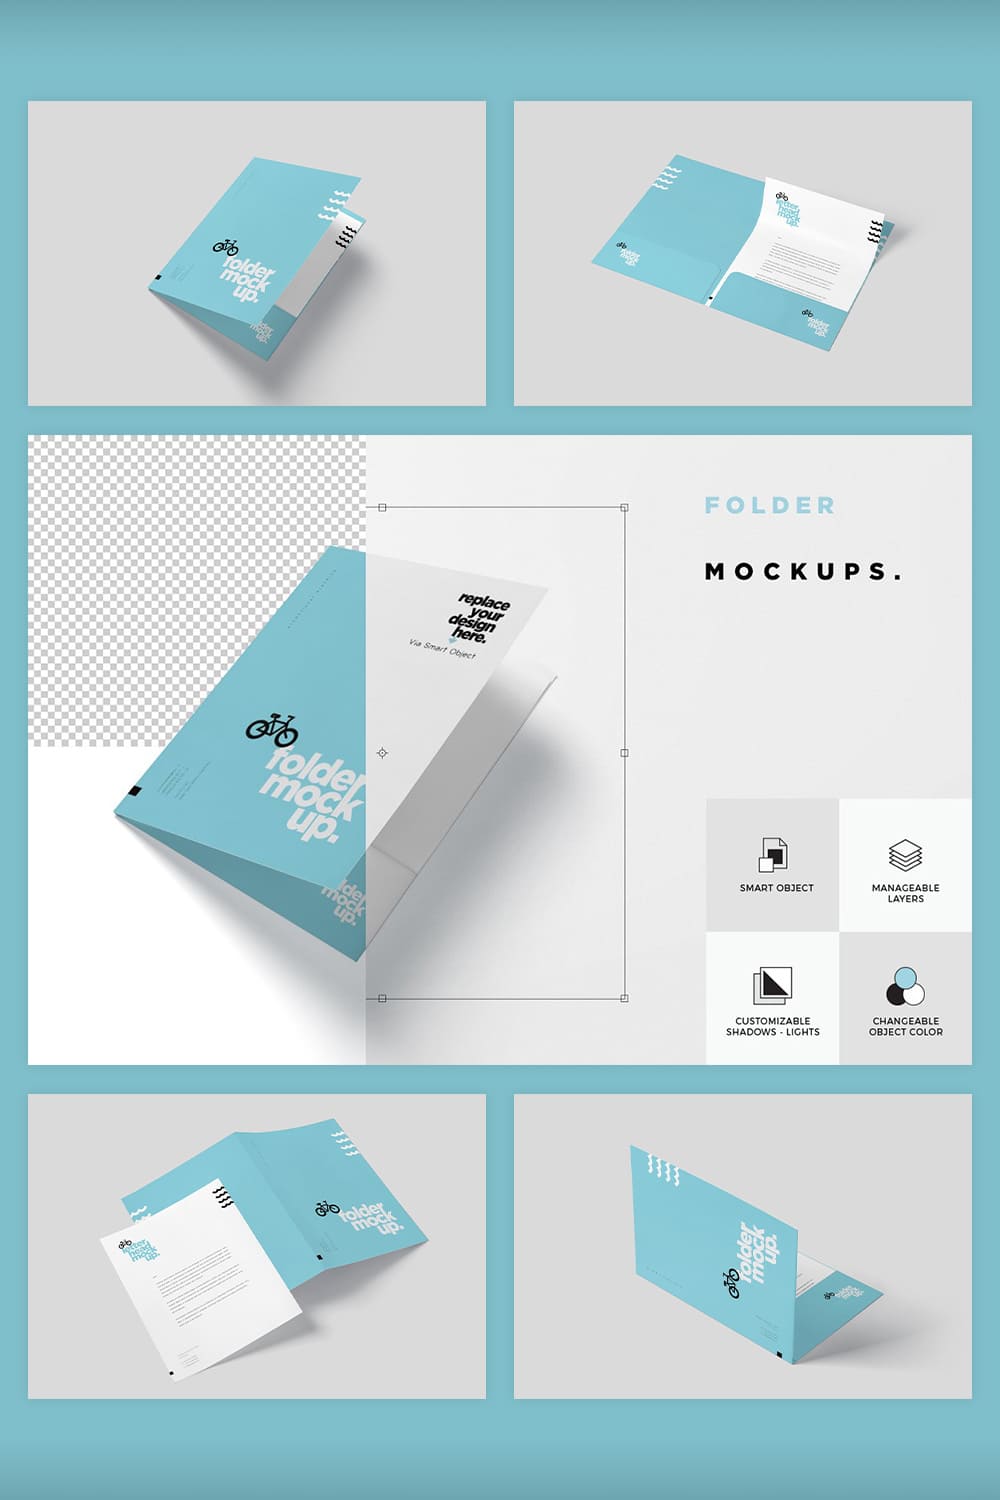 A set of images of paper folders with a wonderful design.